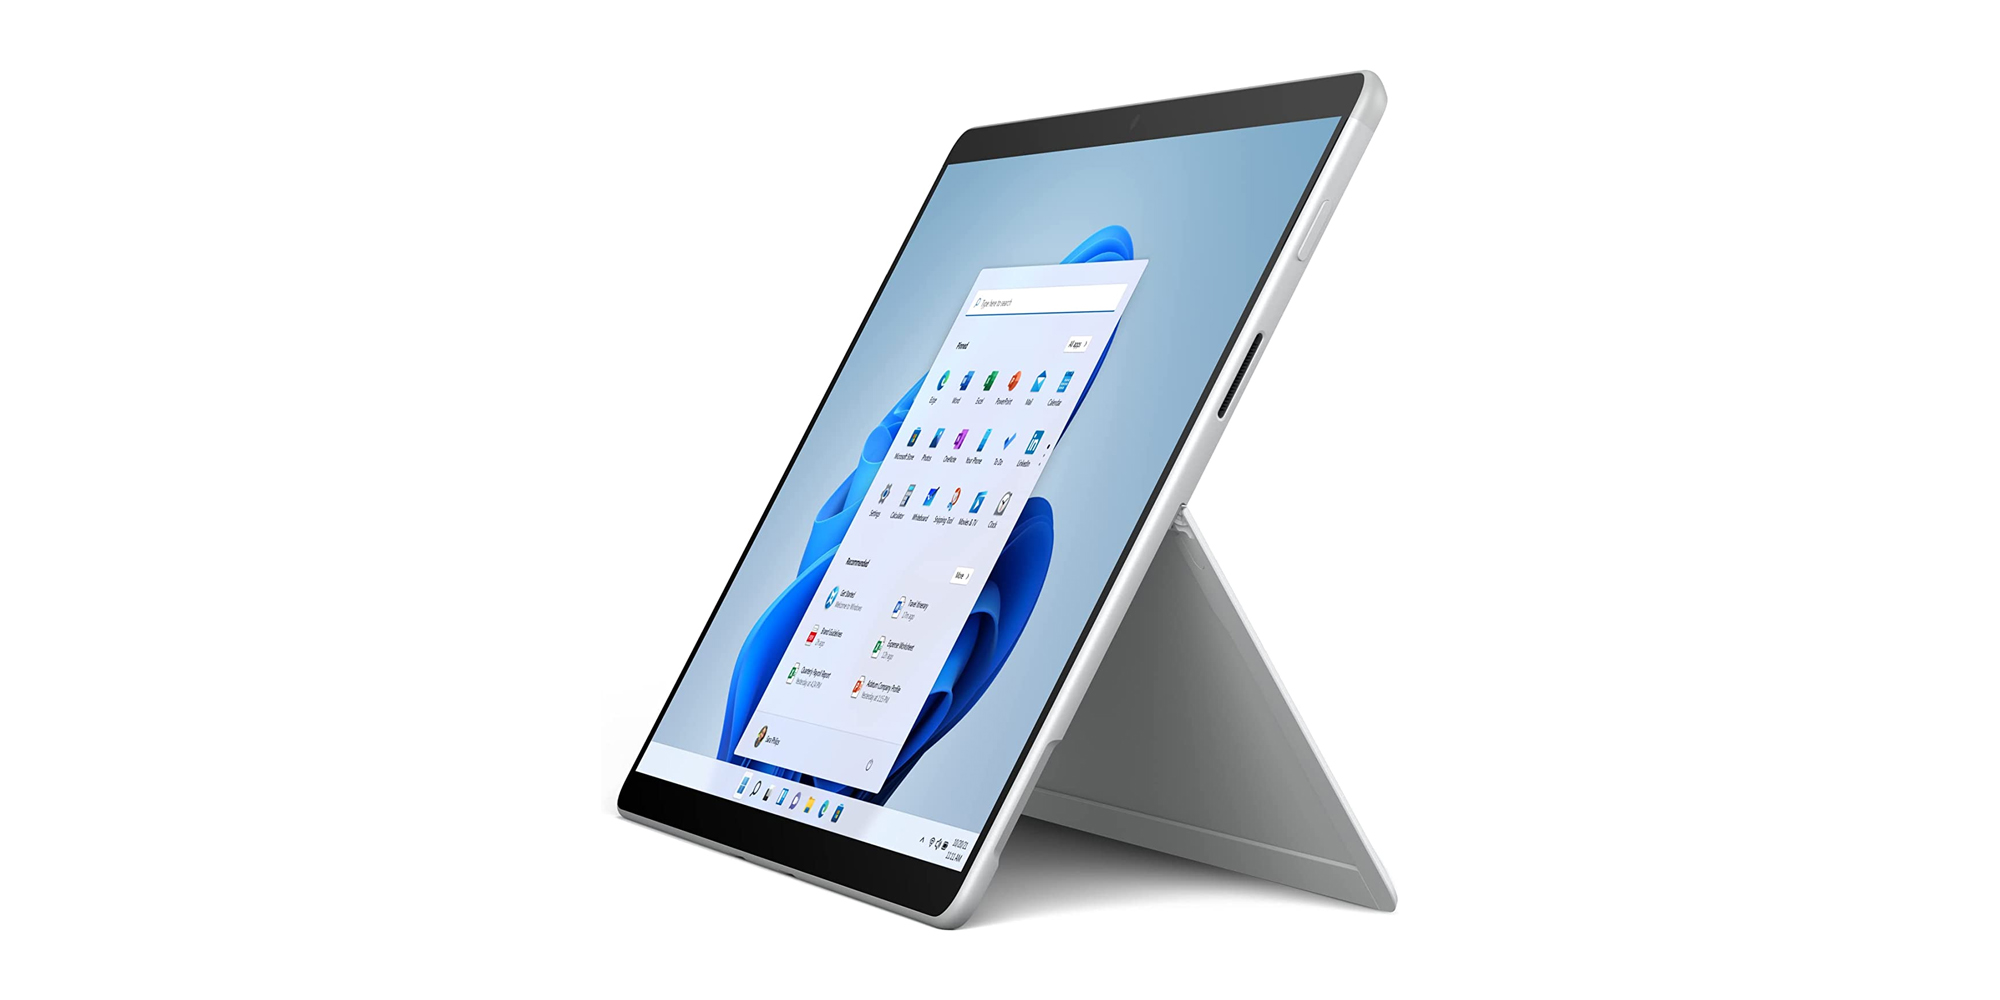 Microsoft's Surface Pro X tablet with SQ2 processor hits new low of 